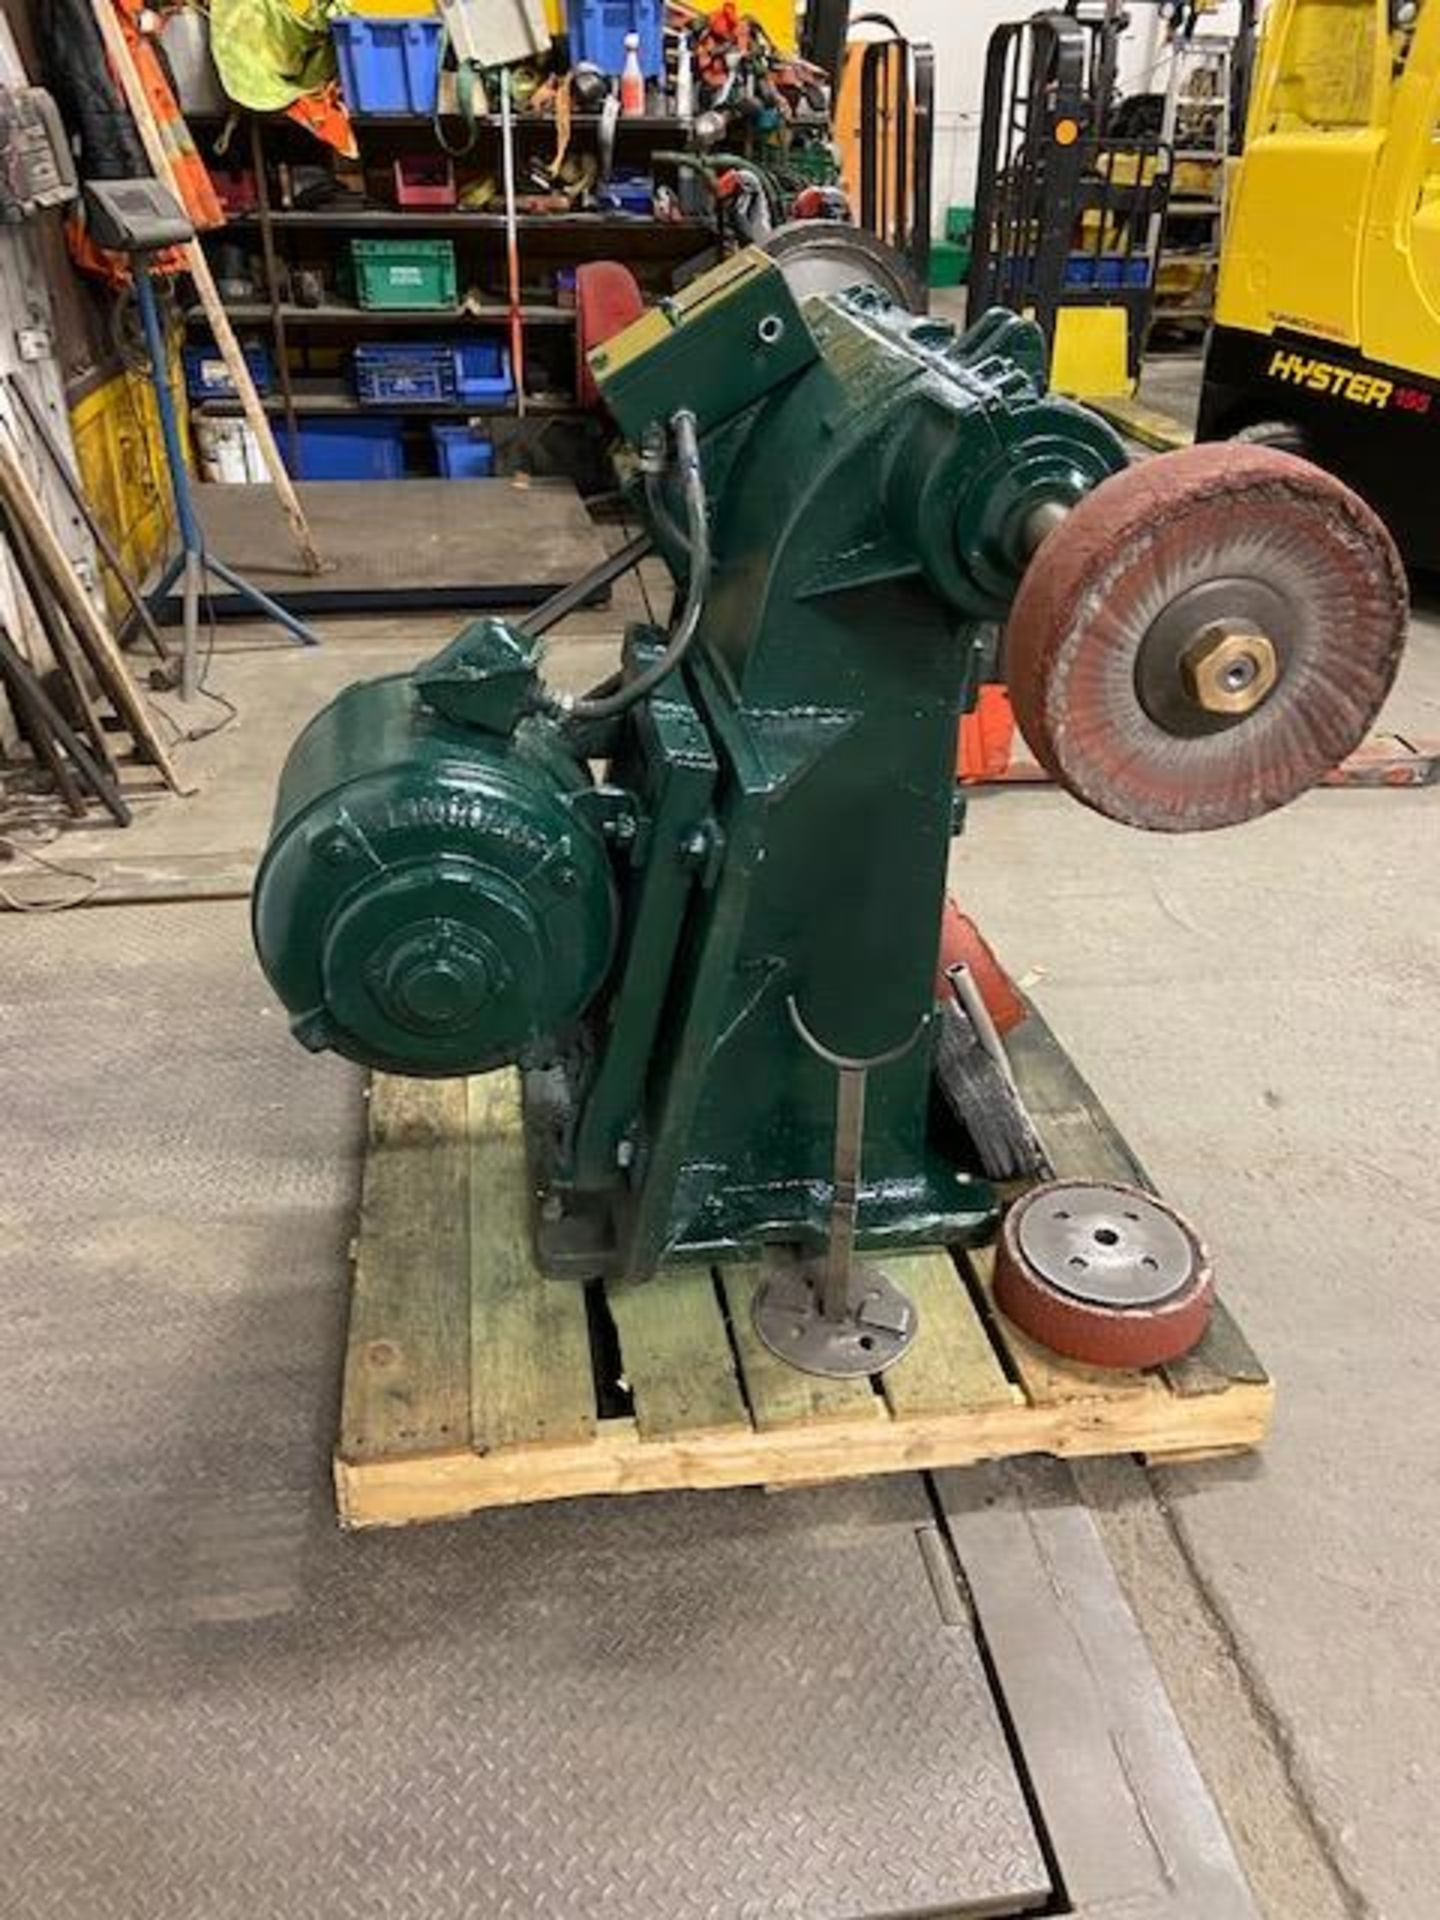 Ford Smith Buffer Polisher Sander Unit with Spare parts - 5' wide unit MINT - Image 2 of 2